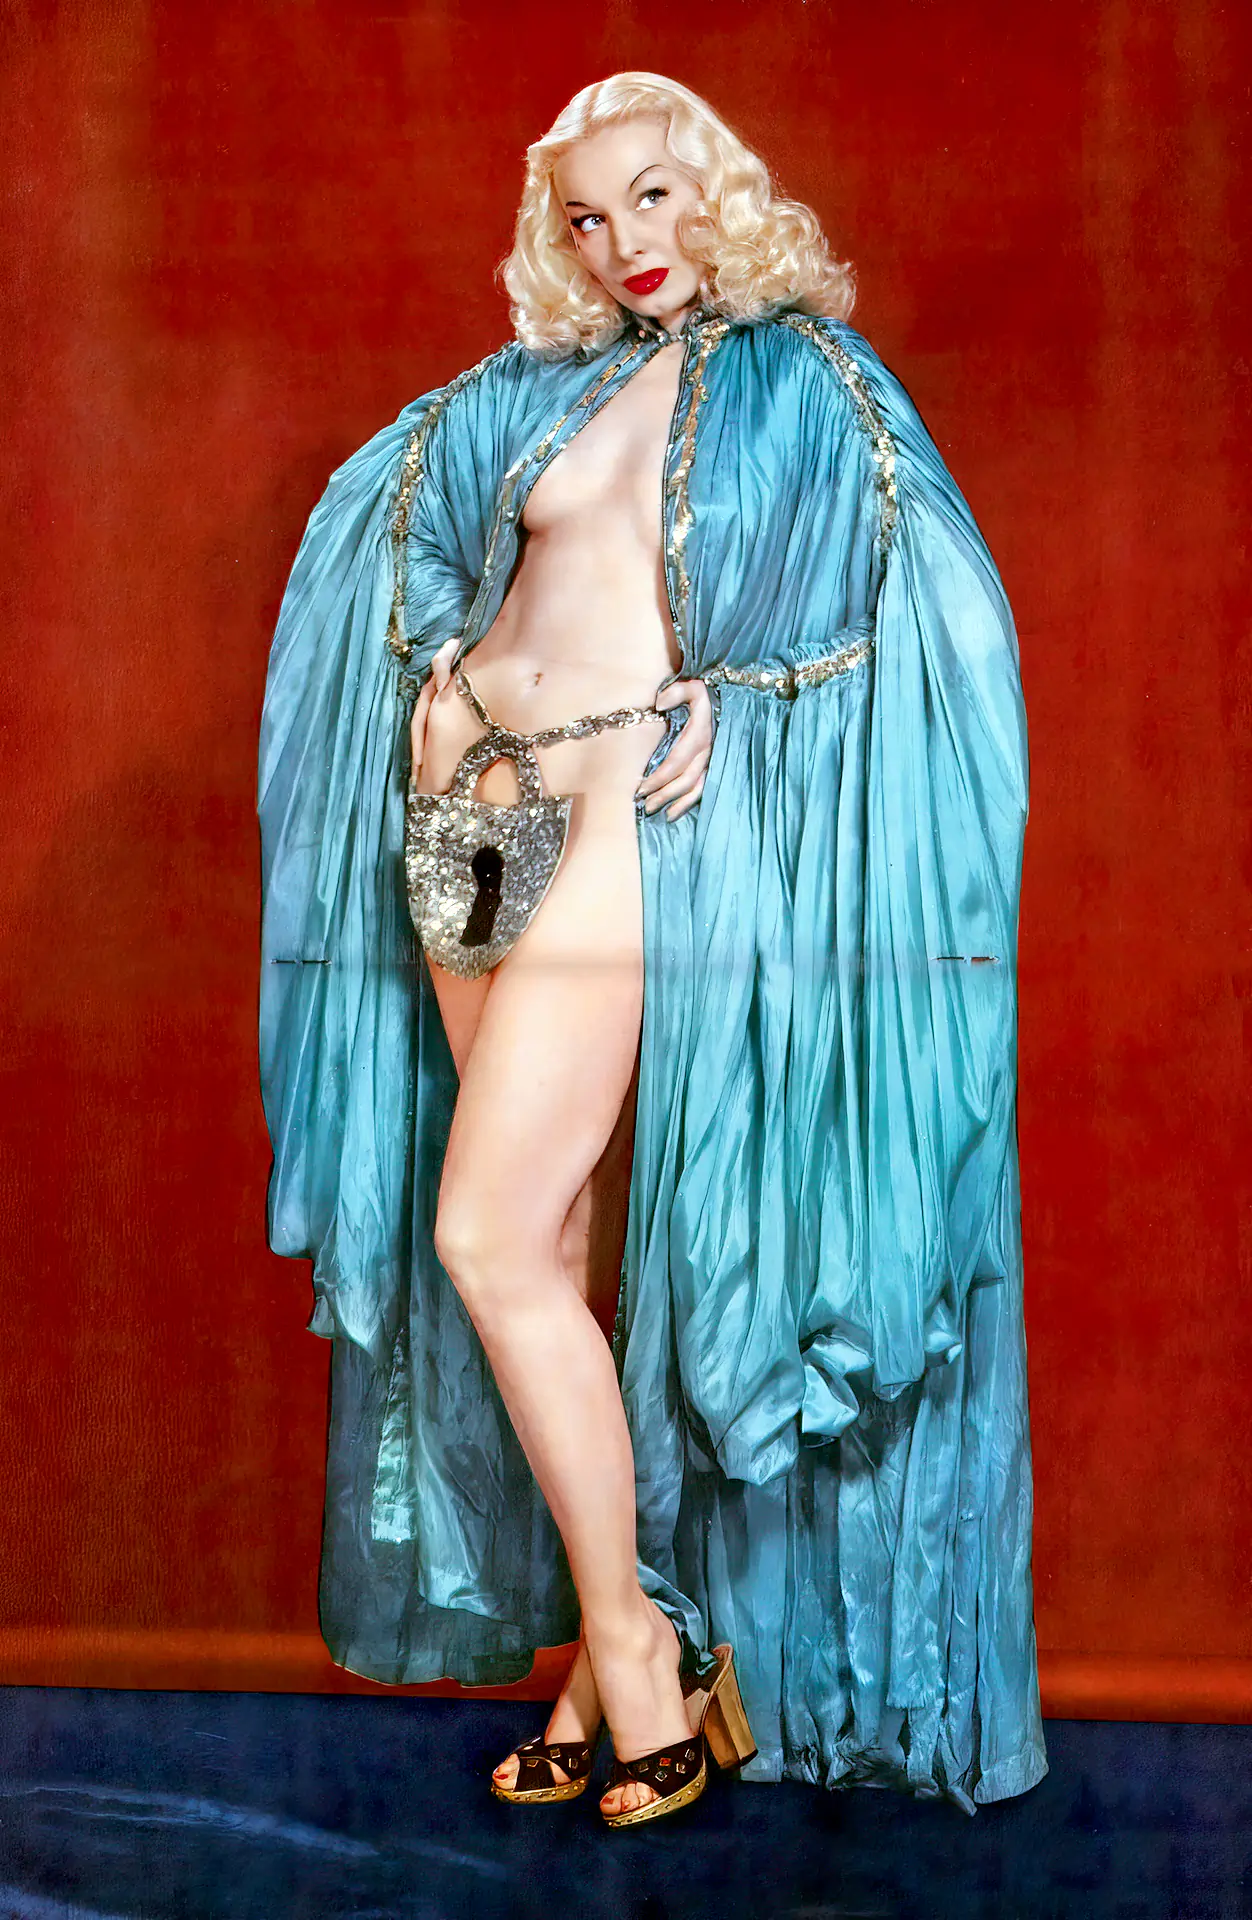 Lili St. Cyr wearing an extravagant robe that covers her body